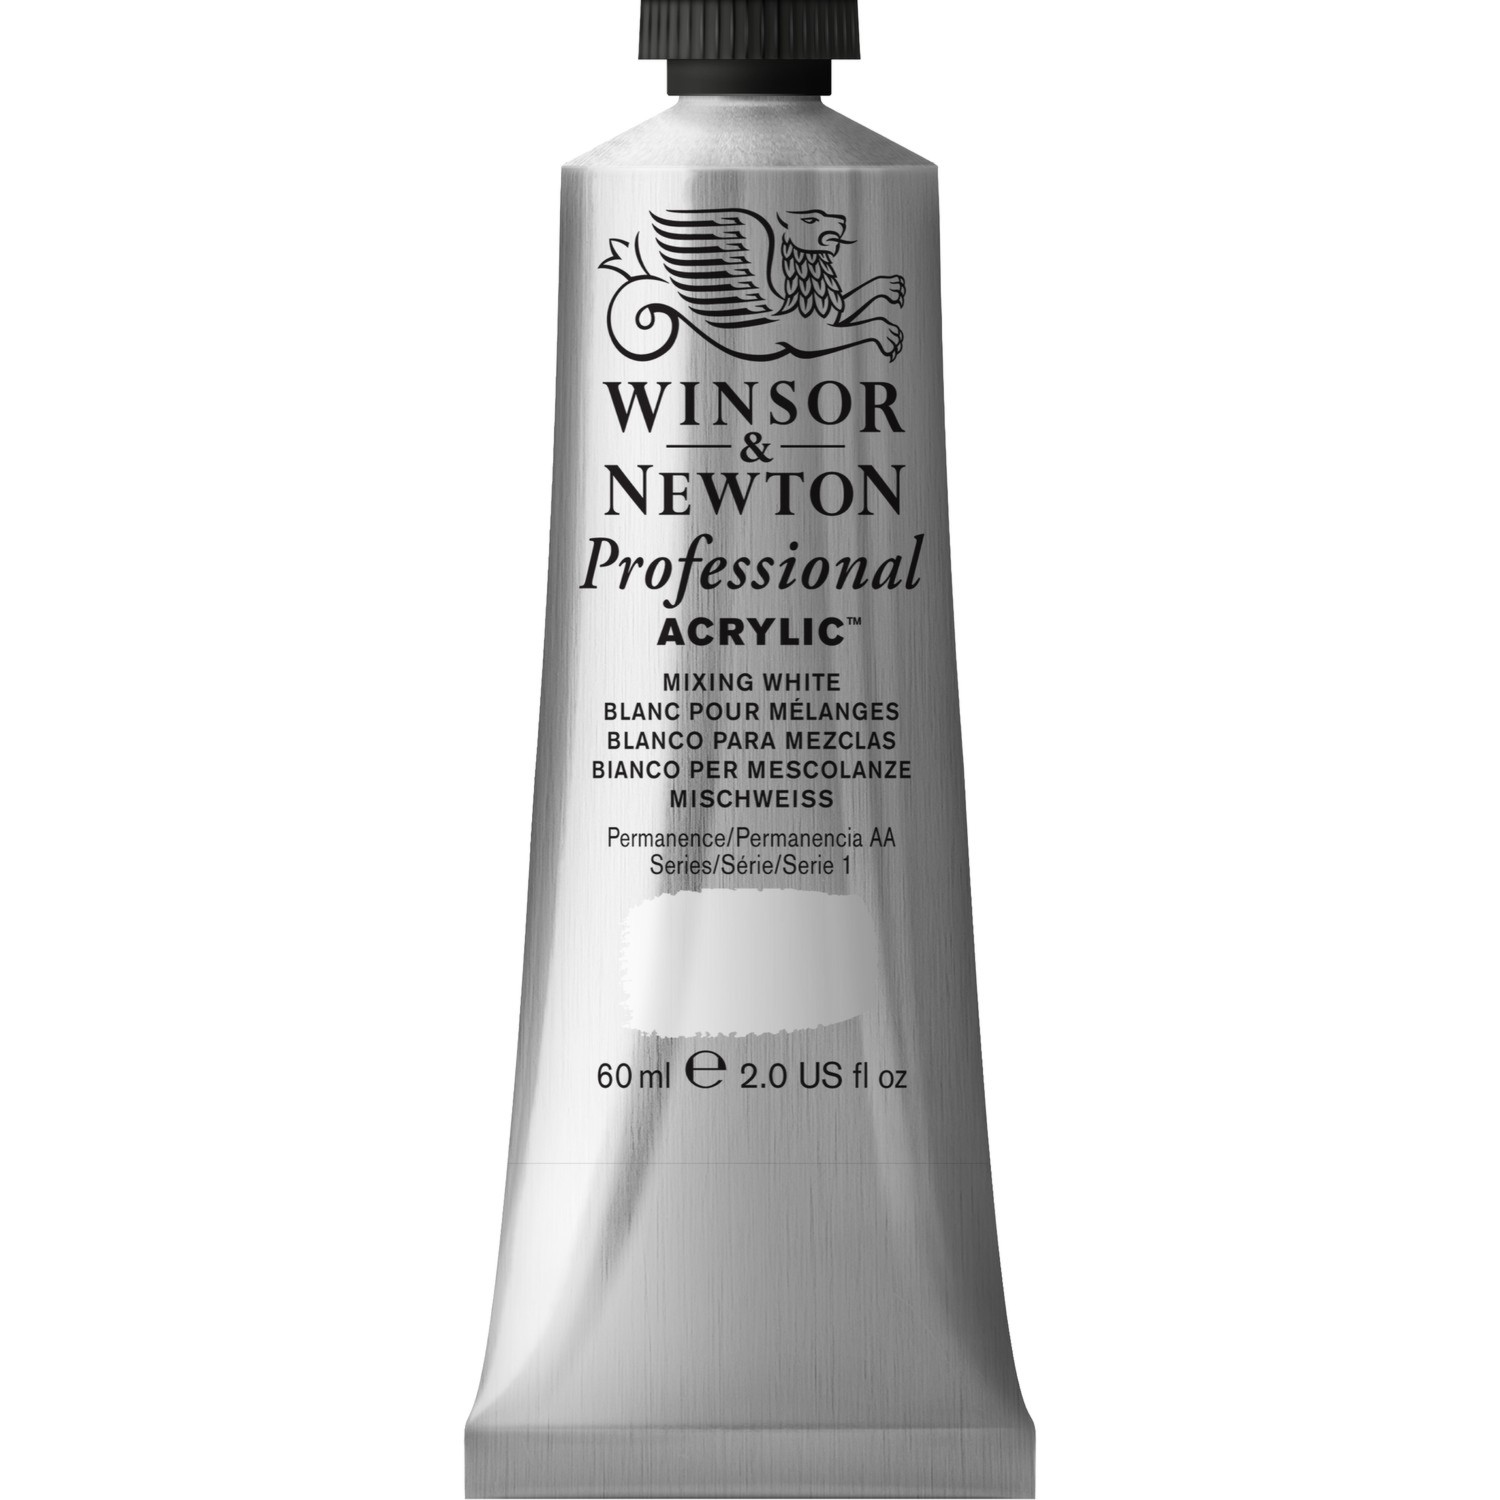 Winsor and Newton 60ml Professional Acrylic Paint - Mixing White Image 1